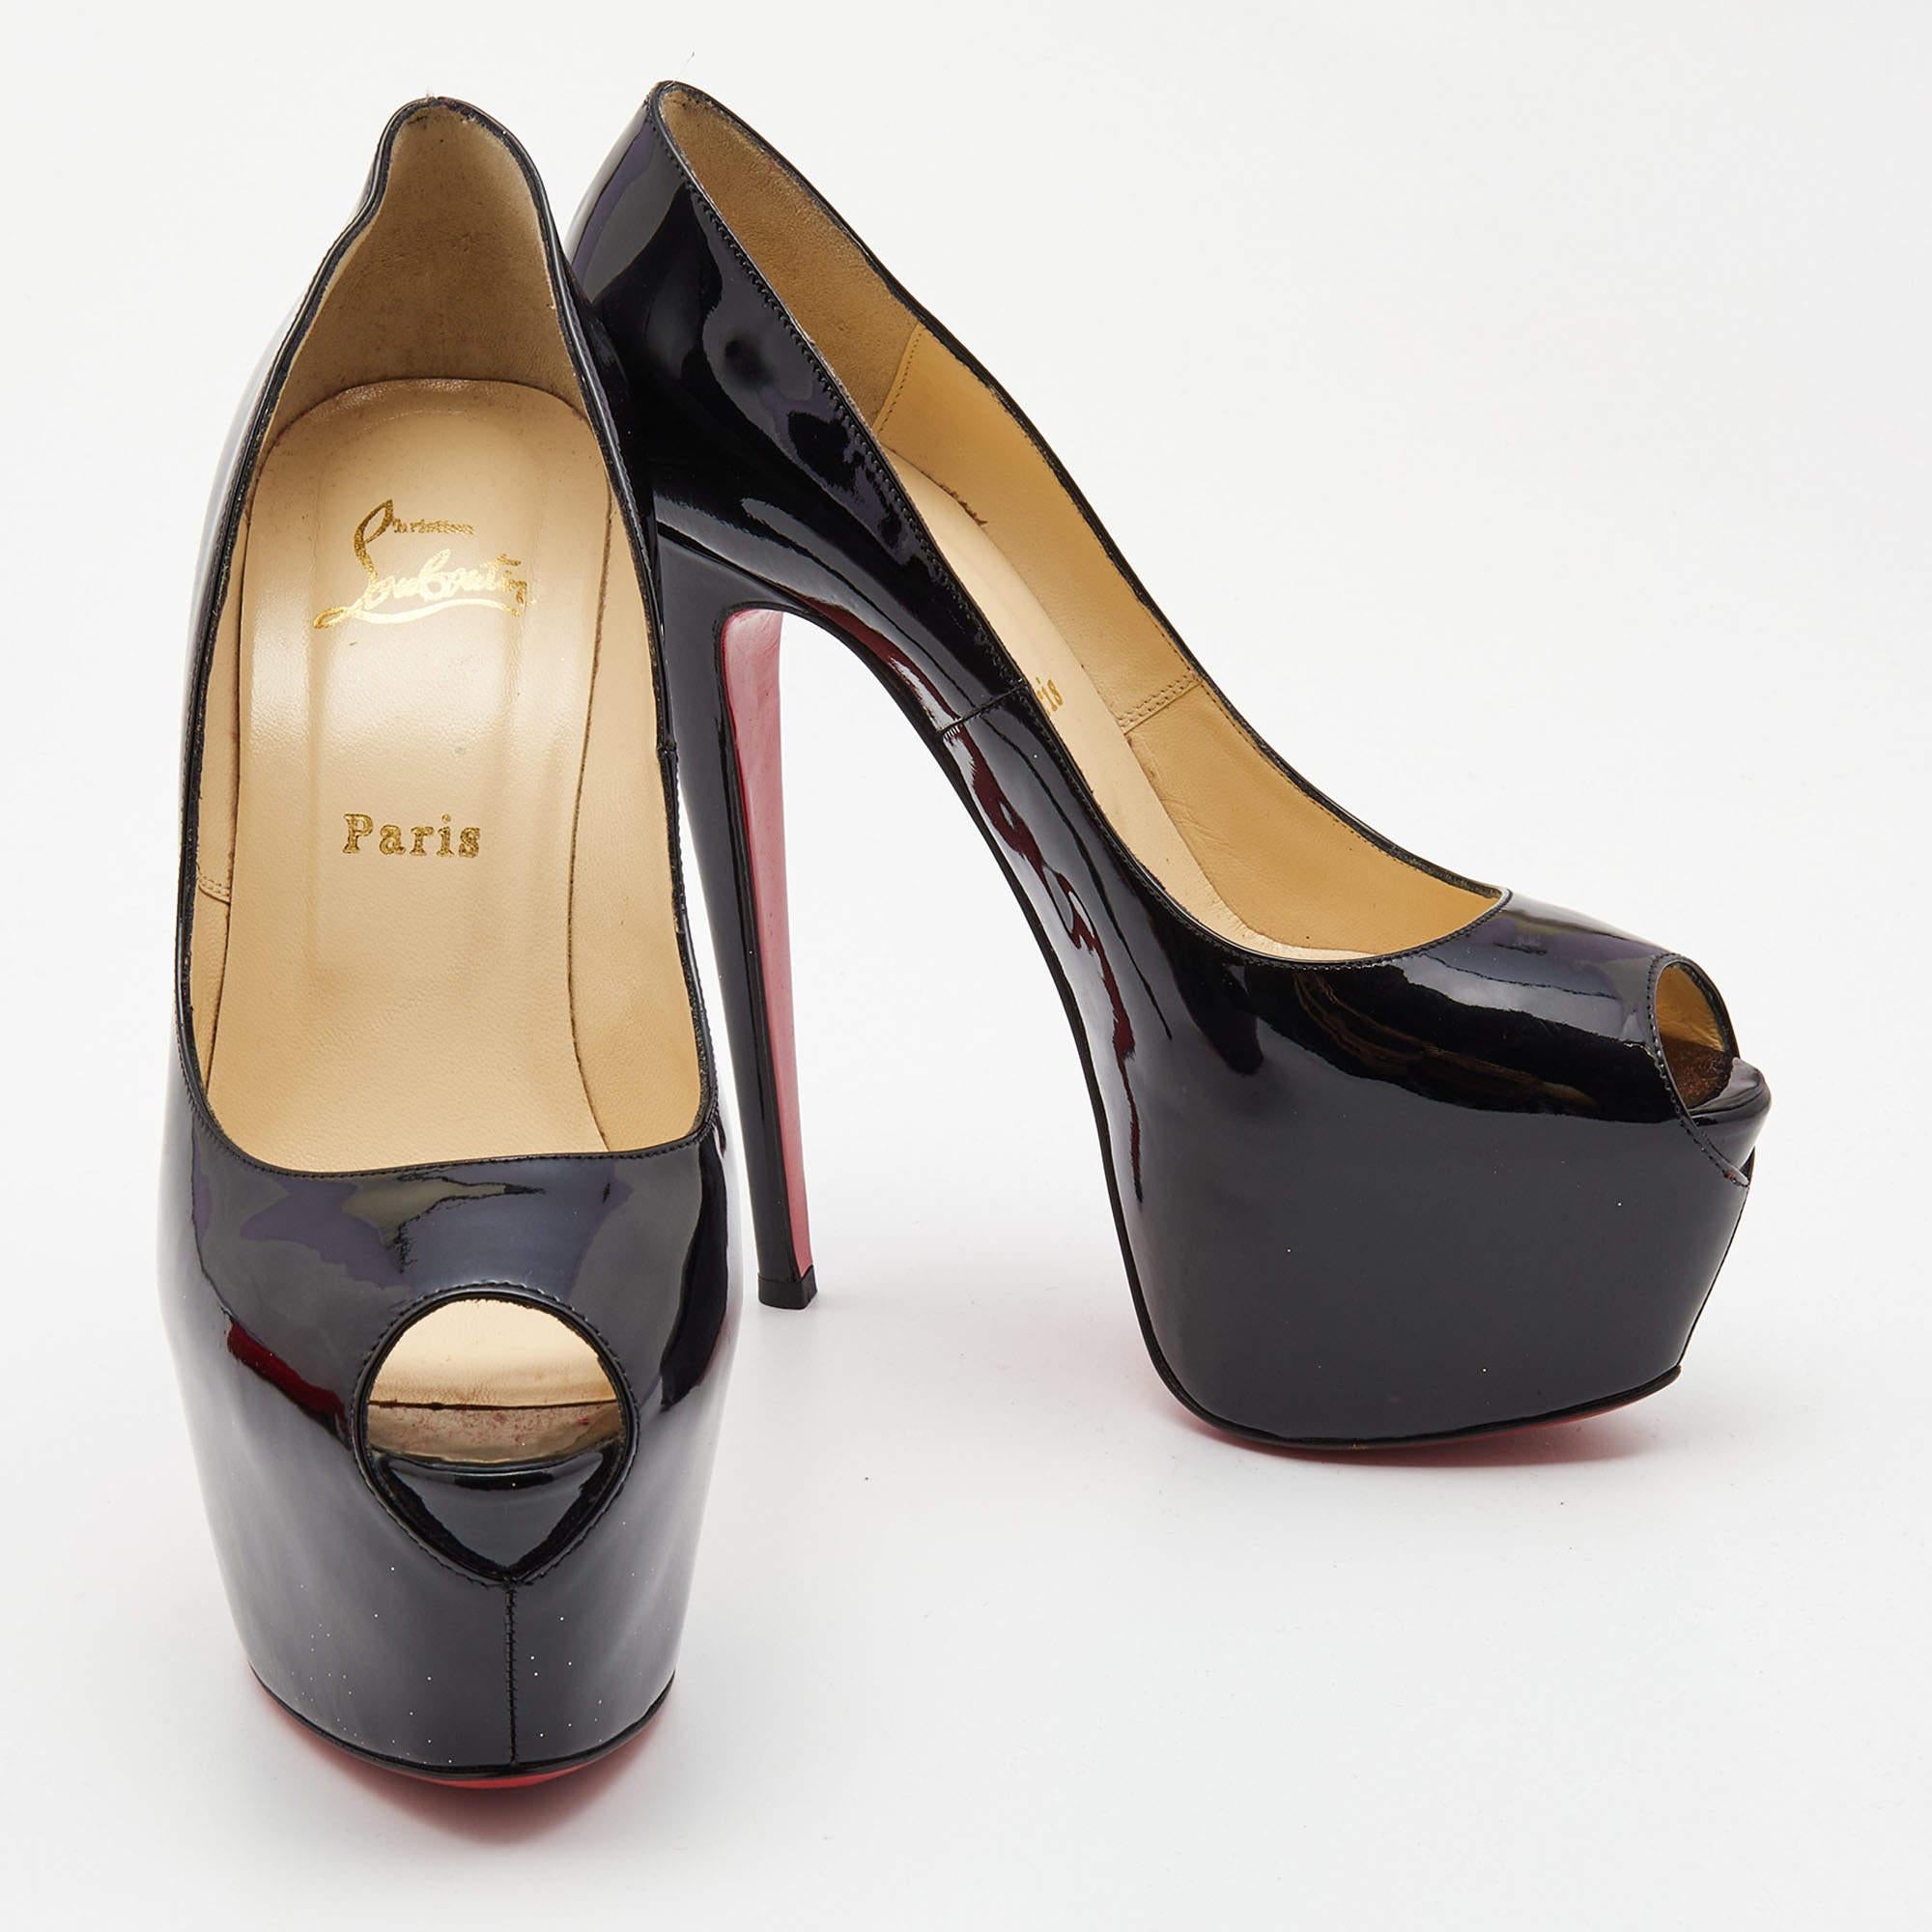 Christian Louboutin Black Patent Leather Highness Pumps Size 39.5 1